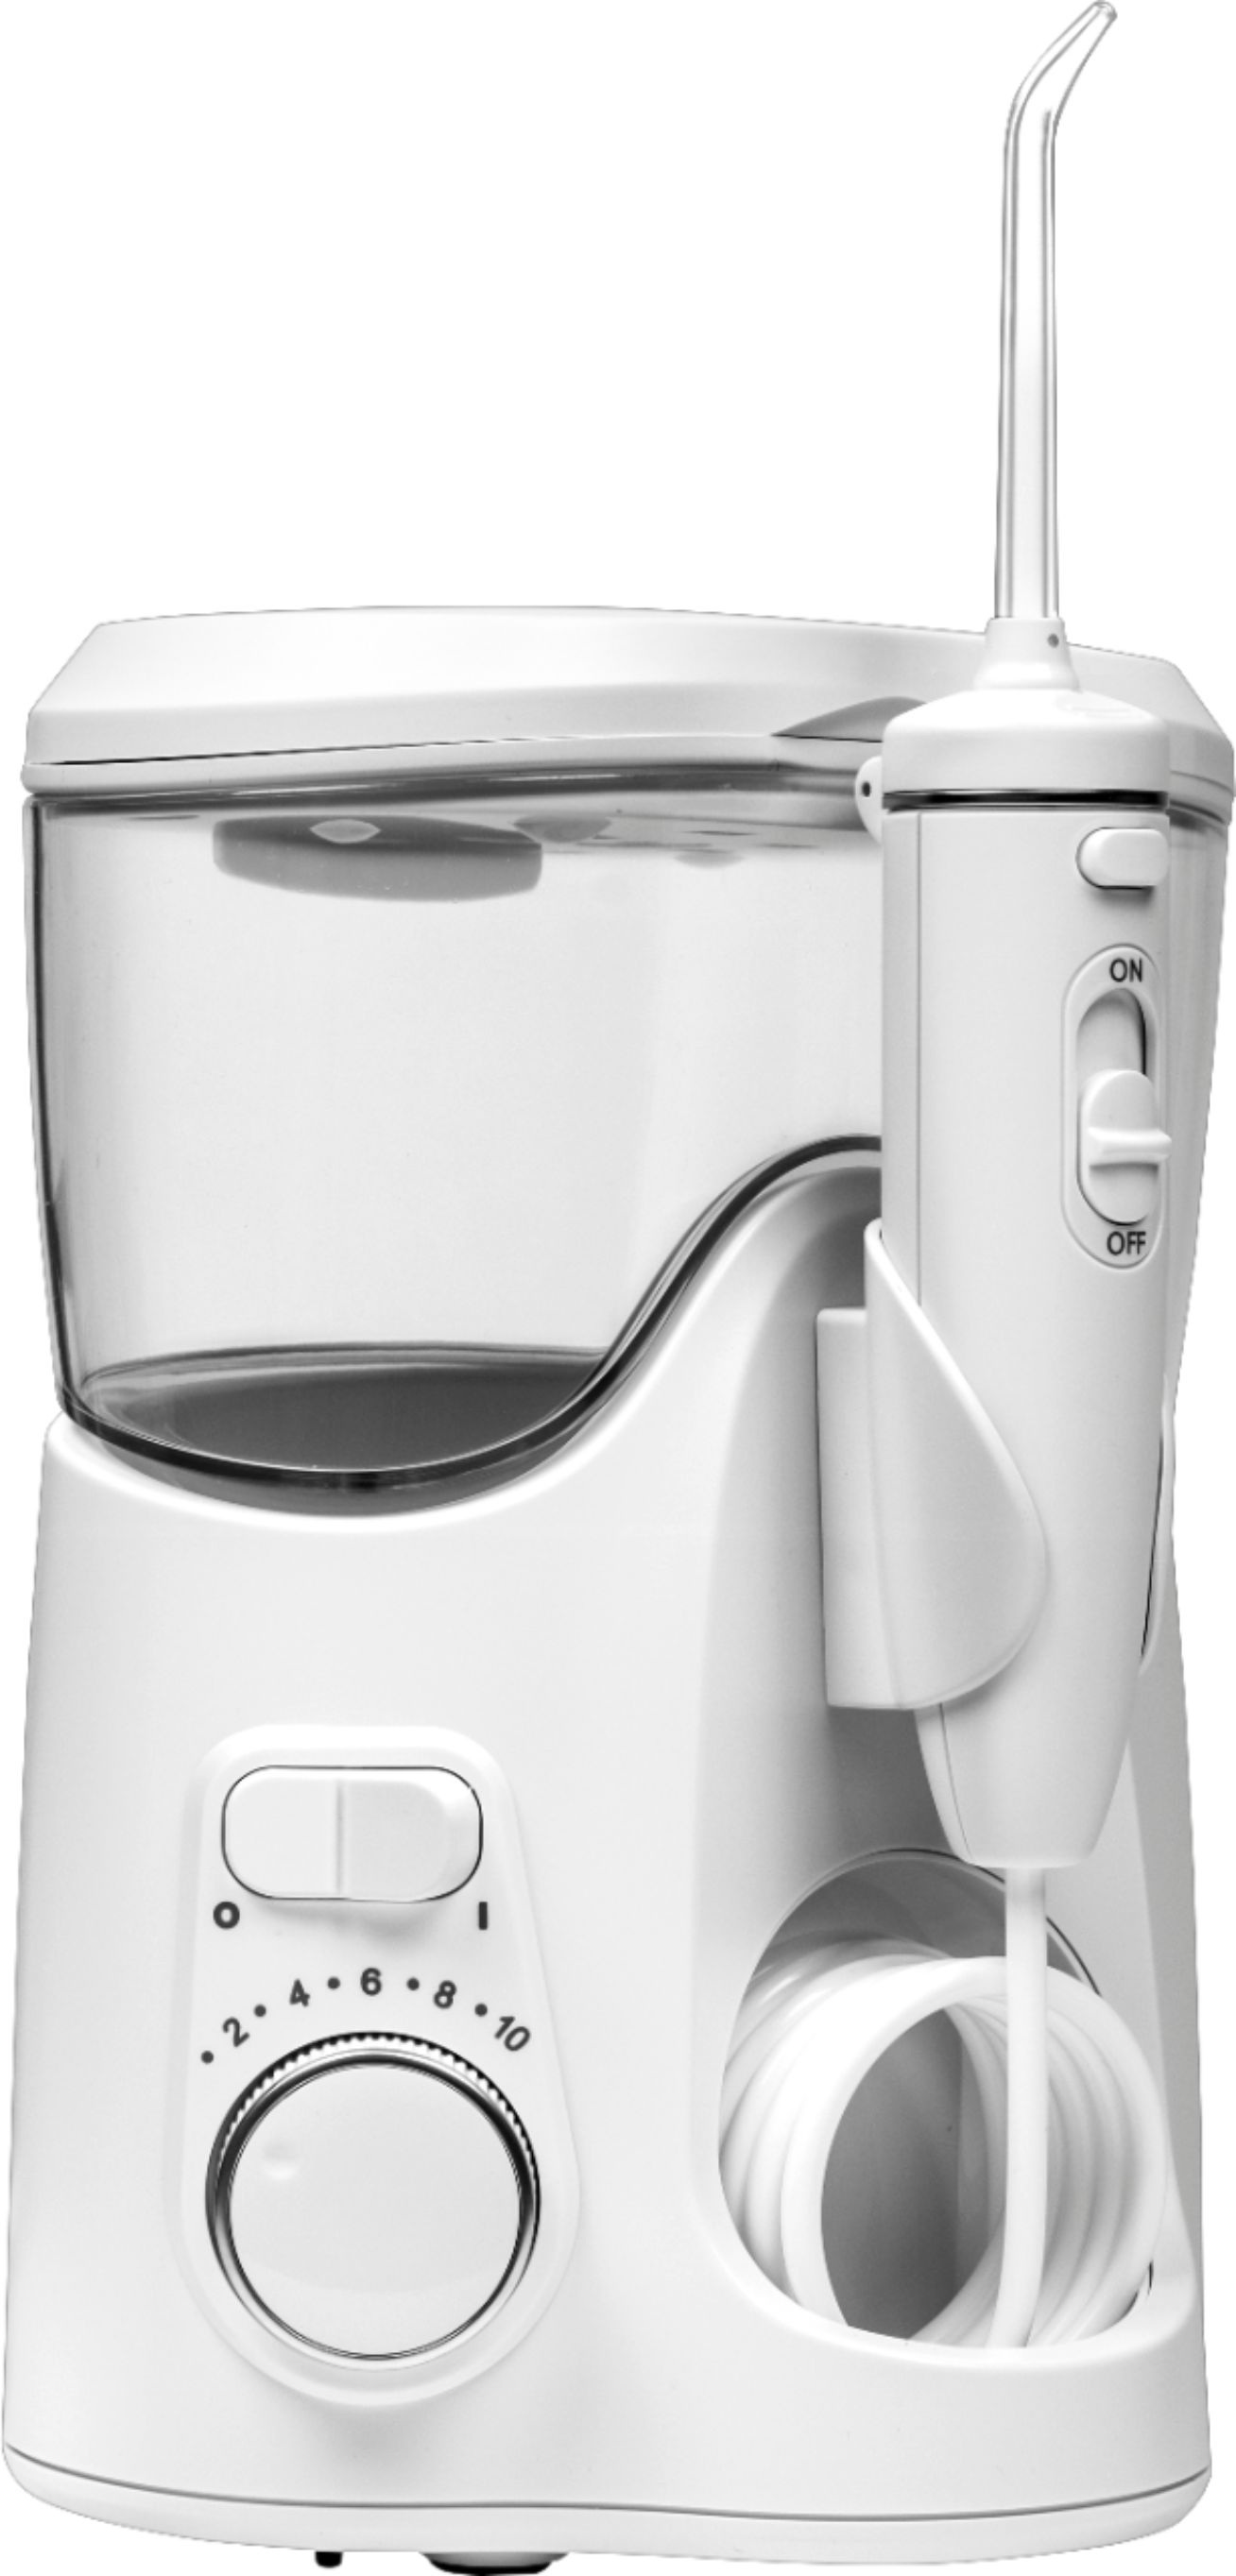 Left View: Waterpik - Whitening Water Flosser - White With Chrome Accents